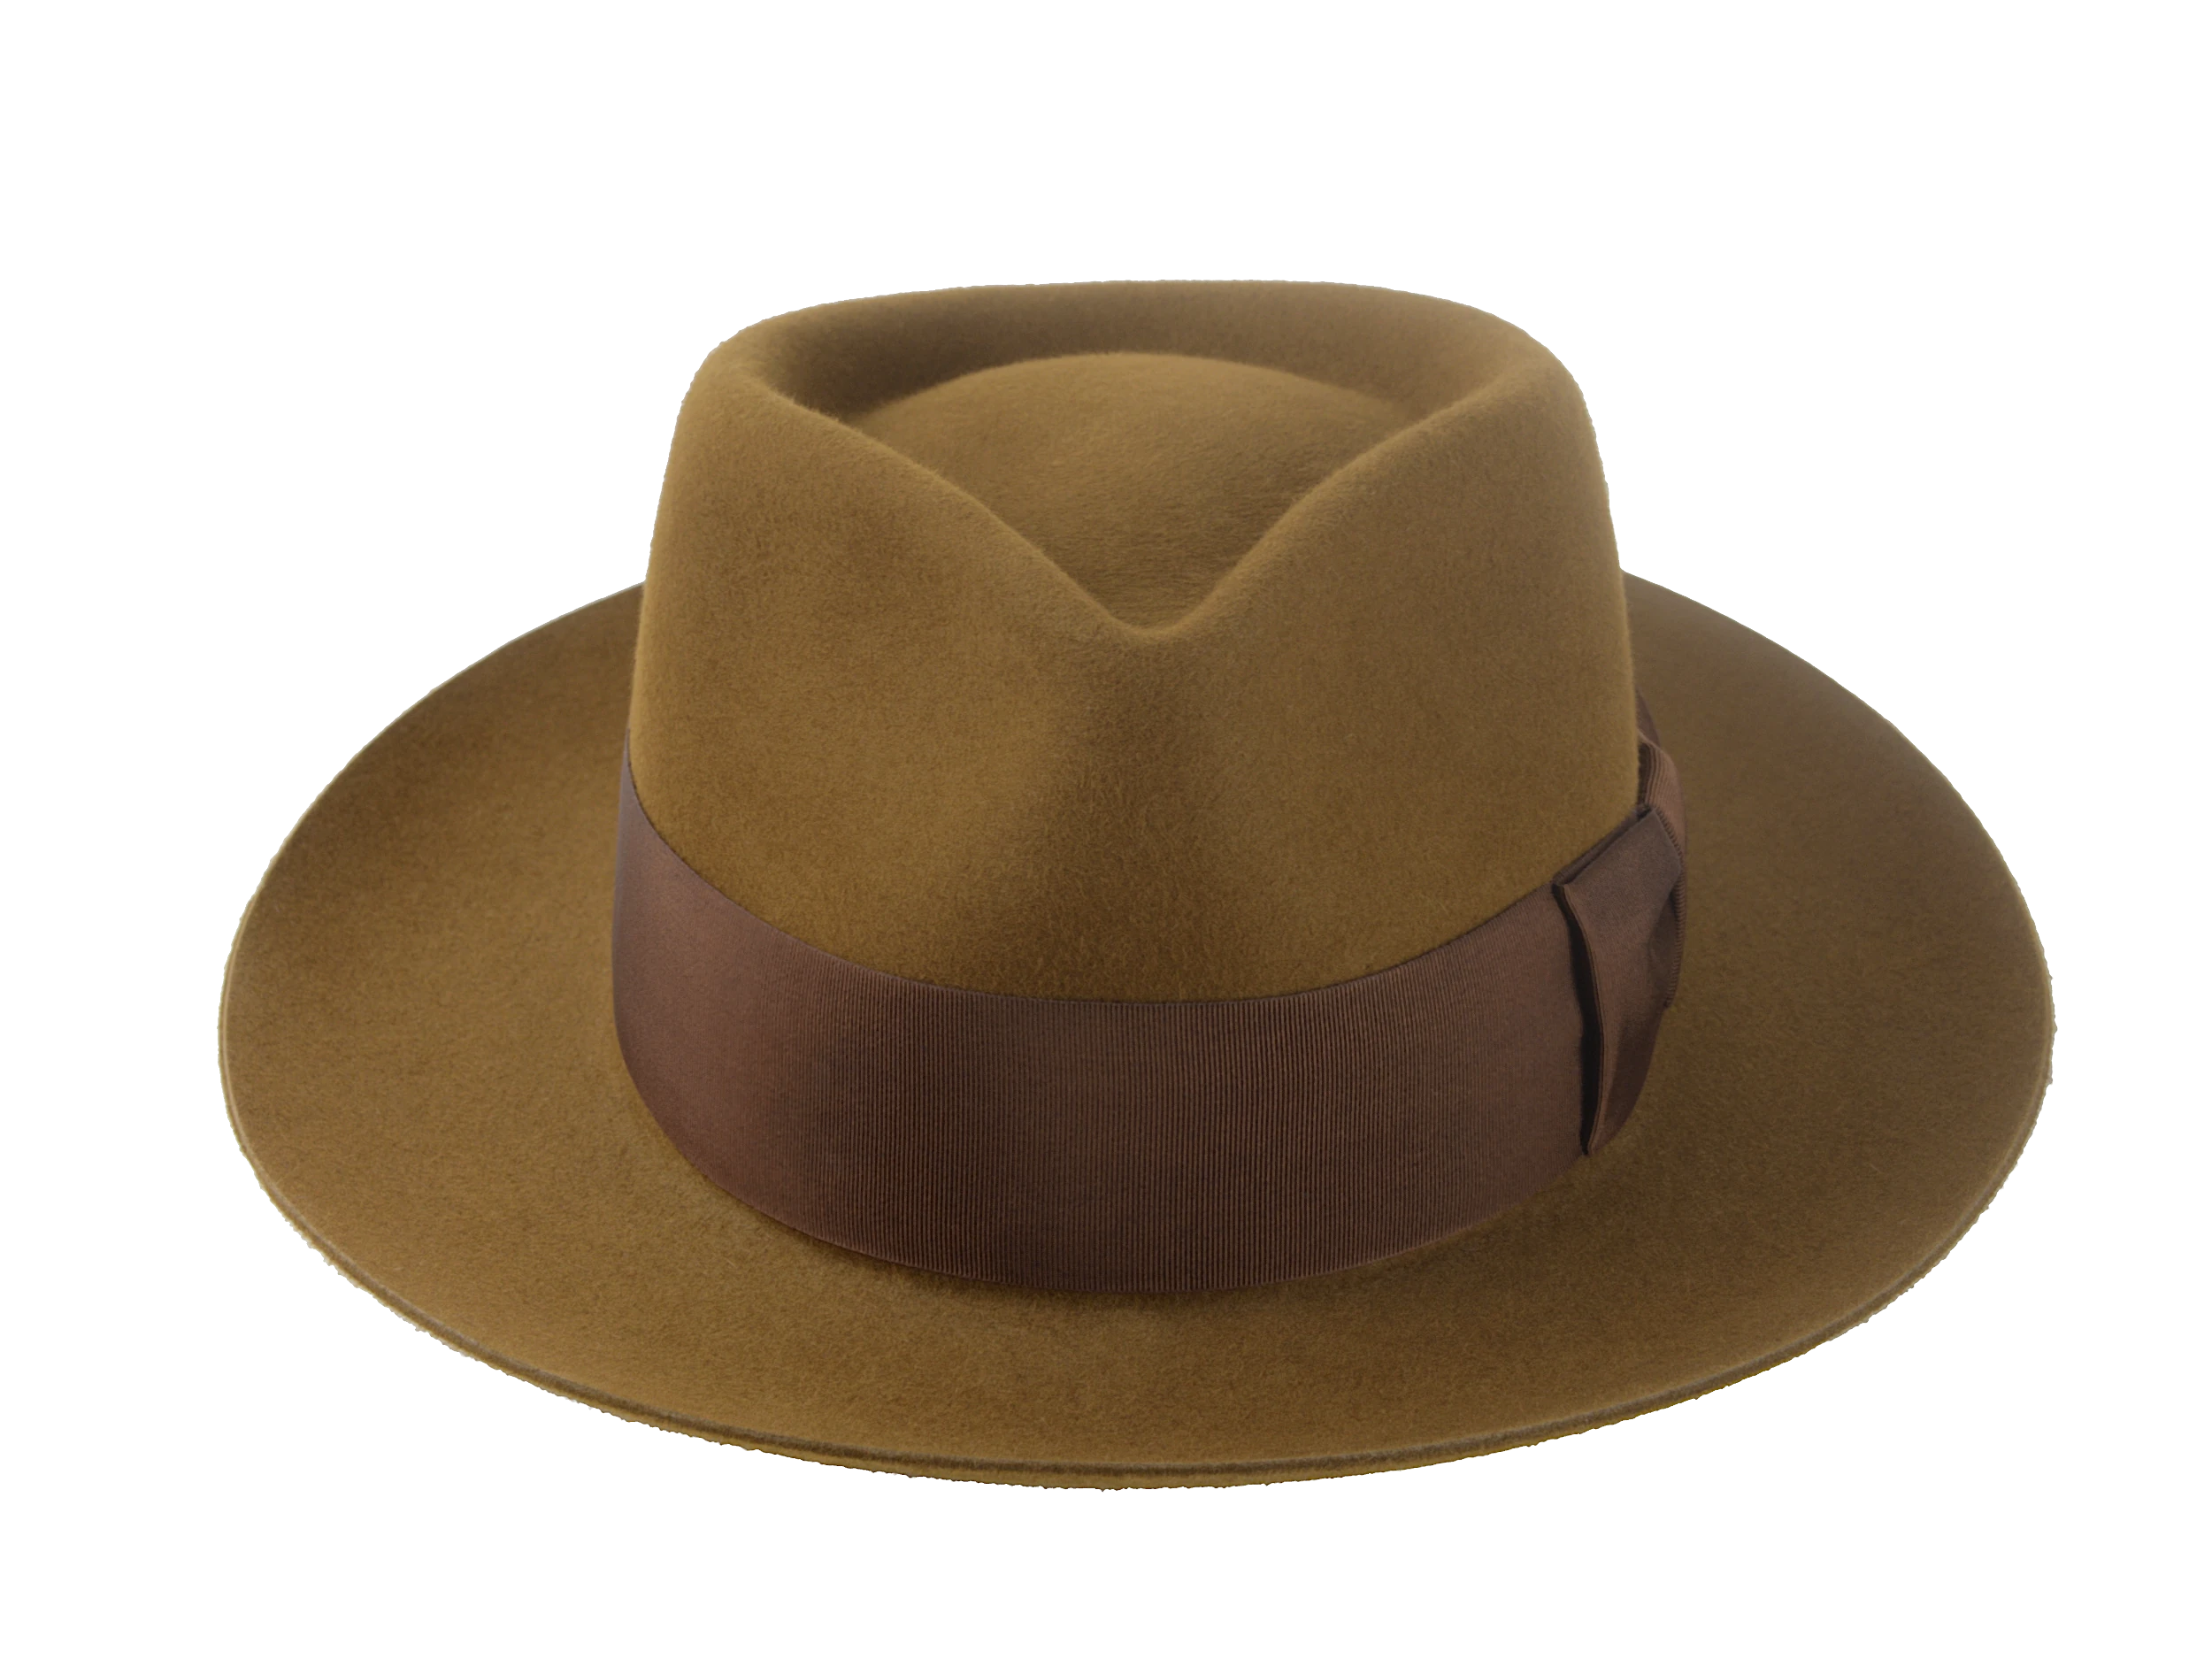 The Shadows: Displaying the hat's precise craftsmanship and smooth finish | Agnoulita Hats